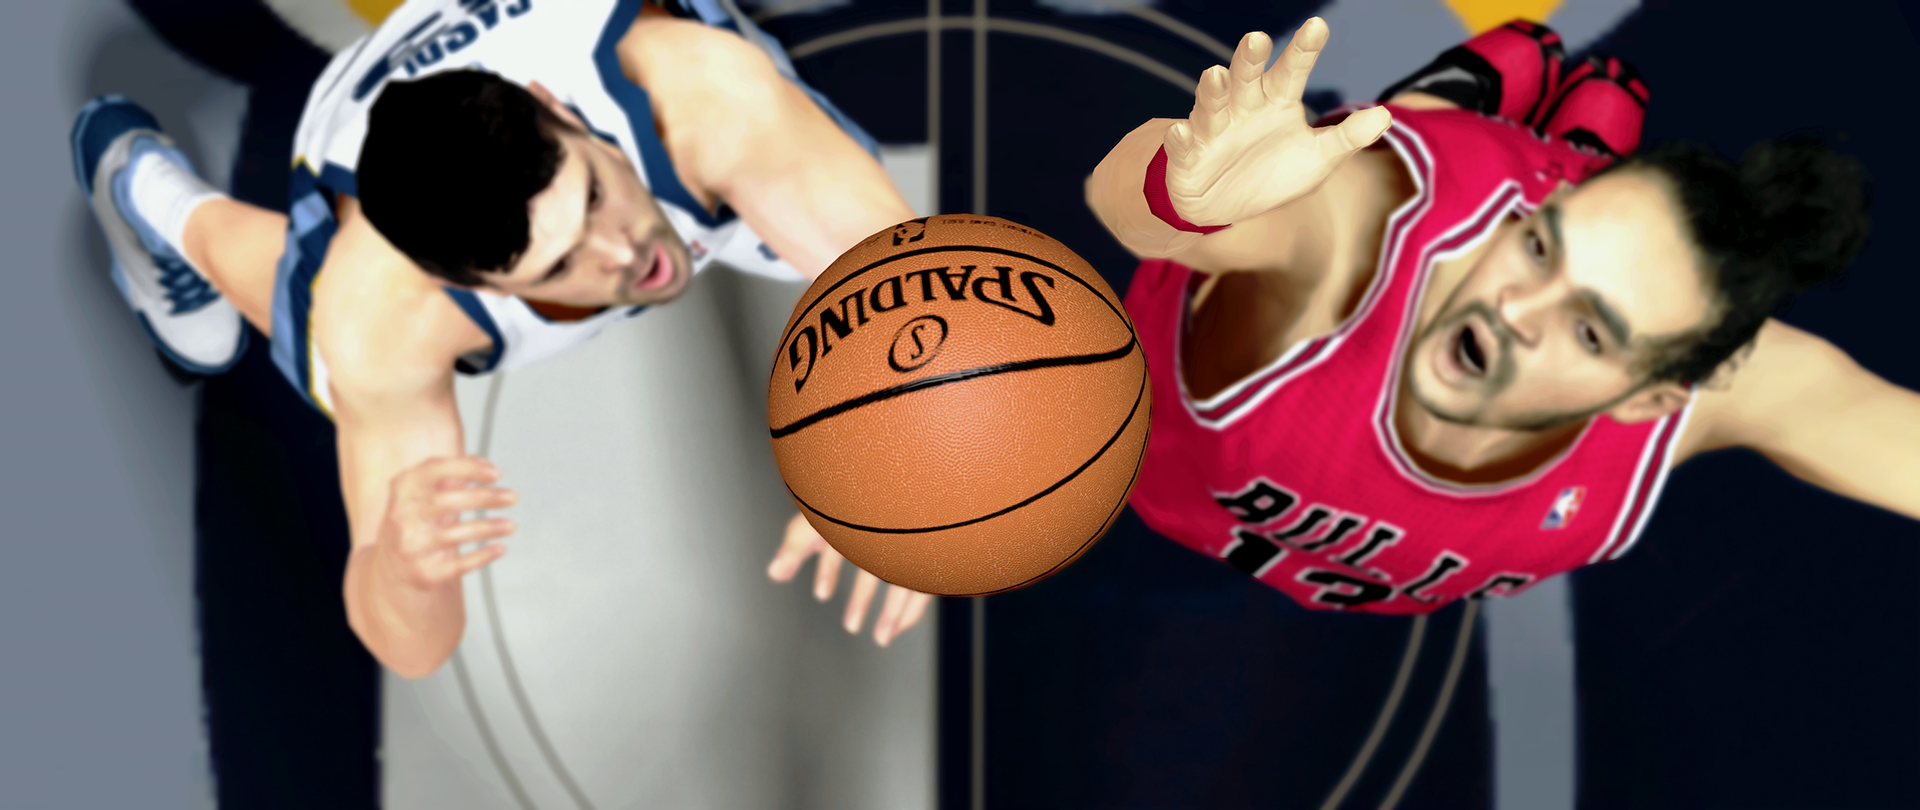 nba_2k13_by_alo81-d66u73a.png